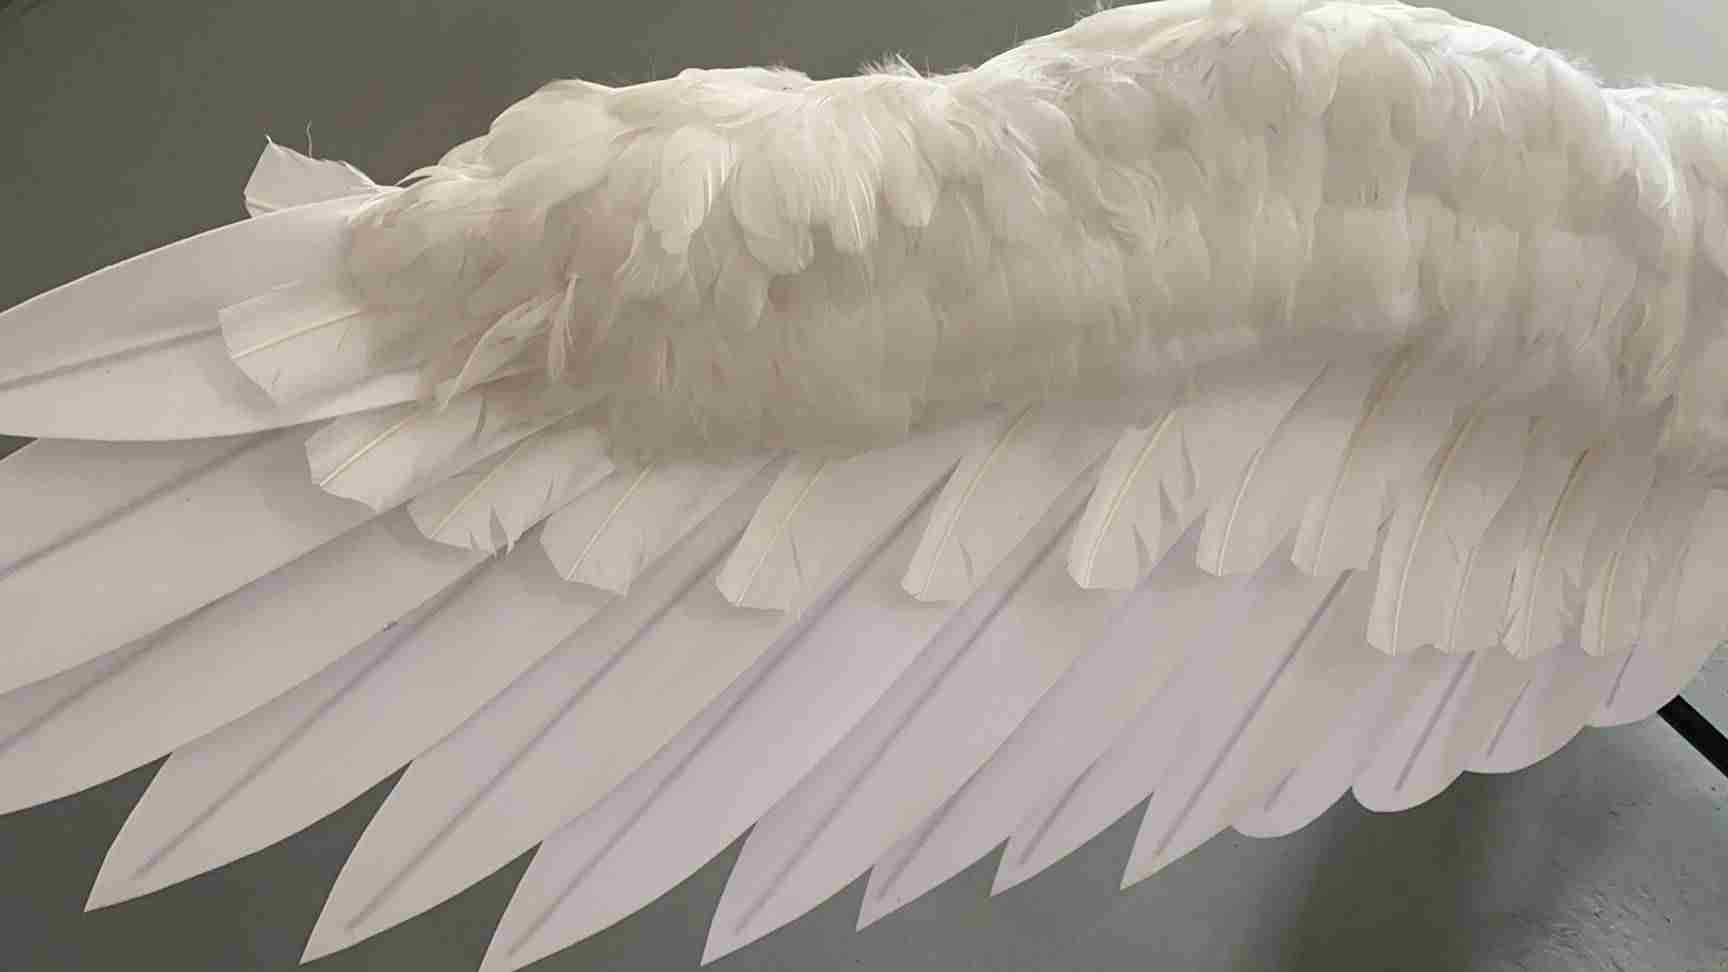 Our large white color angel wings from close view. Wings are moveable and can control extension and folding remotely. Made from flannel cloth and goose feathers. Wings for angel costume or devil costume. Suitable for fantasy photoshoots or events.